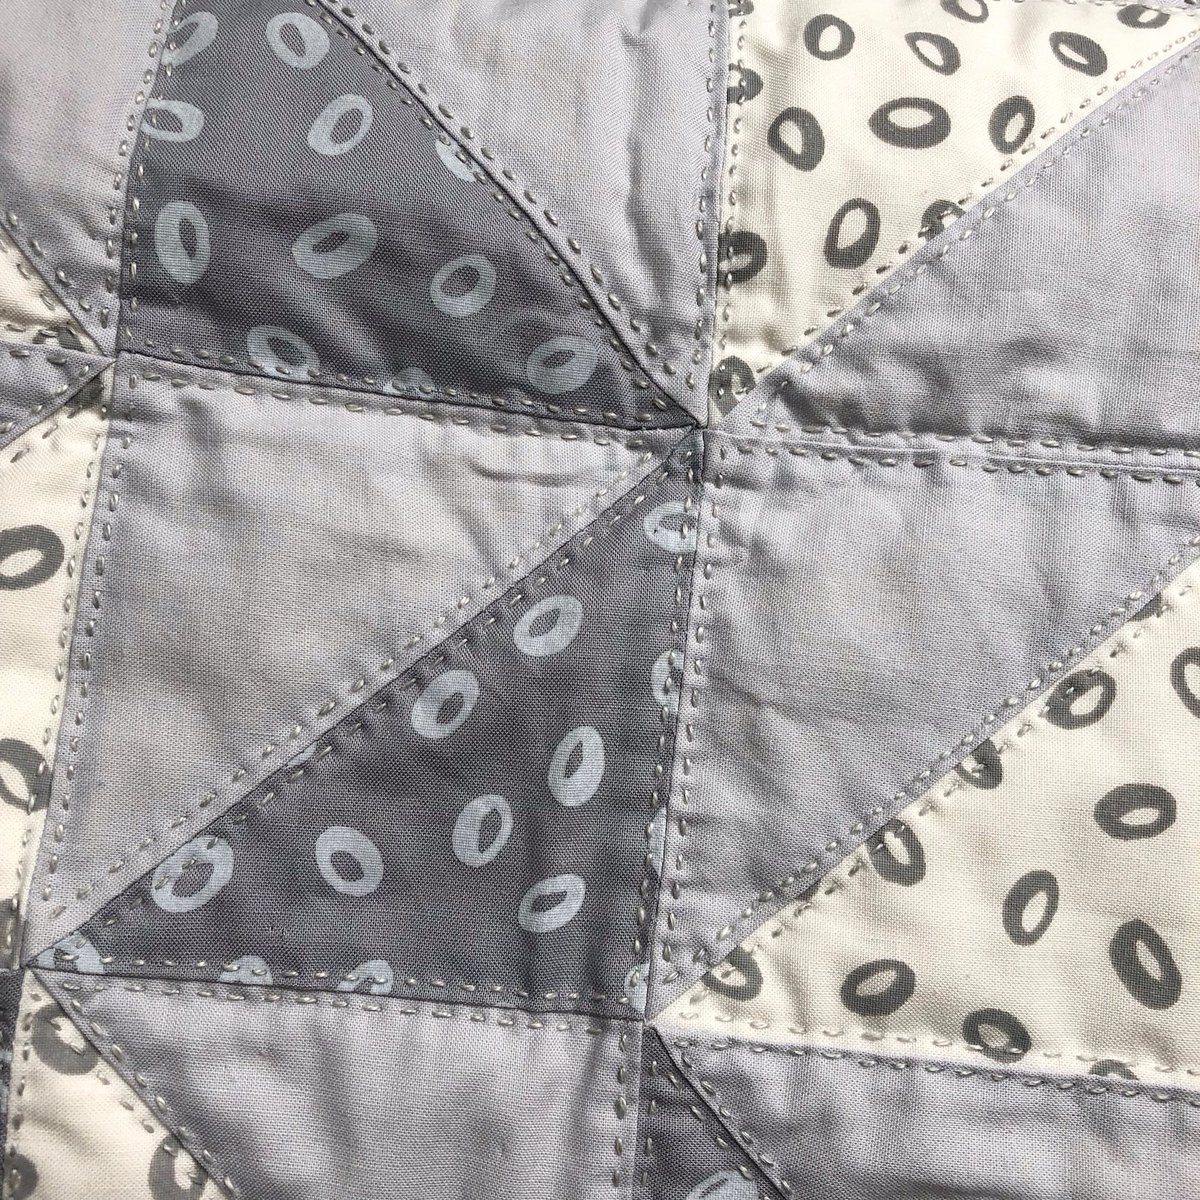 Hand quilting all the greys. This kept me busy over the half term, something I could pick up between days out & board games. Shame the girls are back at school, but wow I've got a lot done this week! 
#handquilted #handprinted #halfsquaretriangles #modernquilting